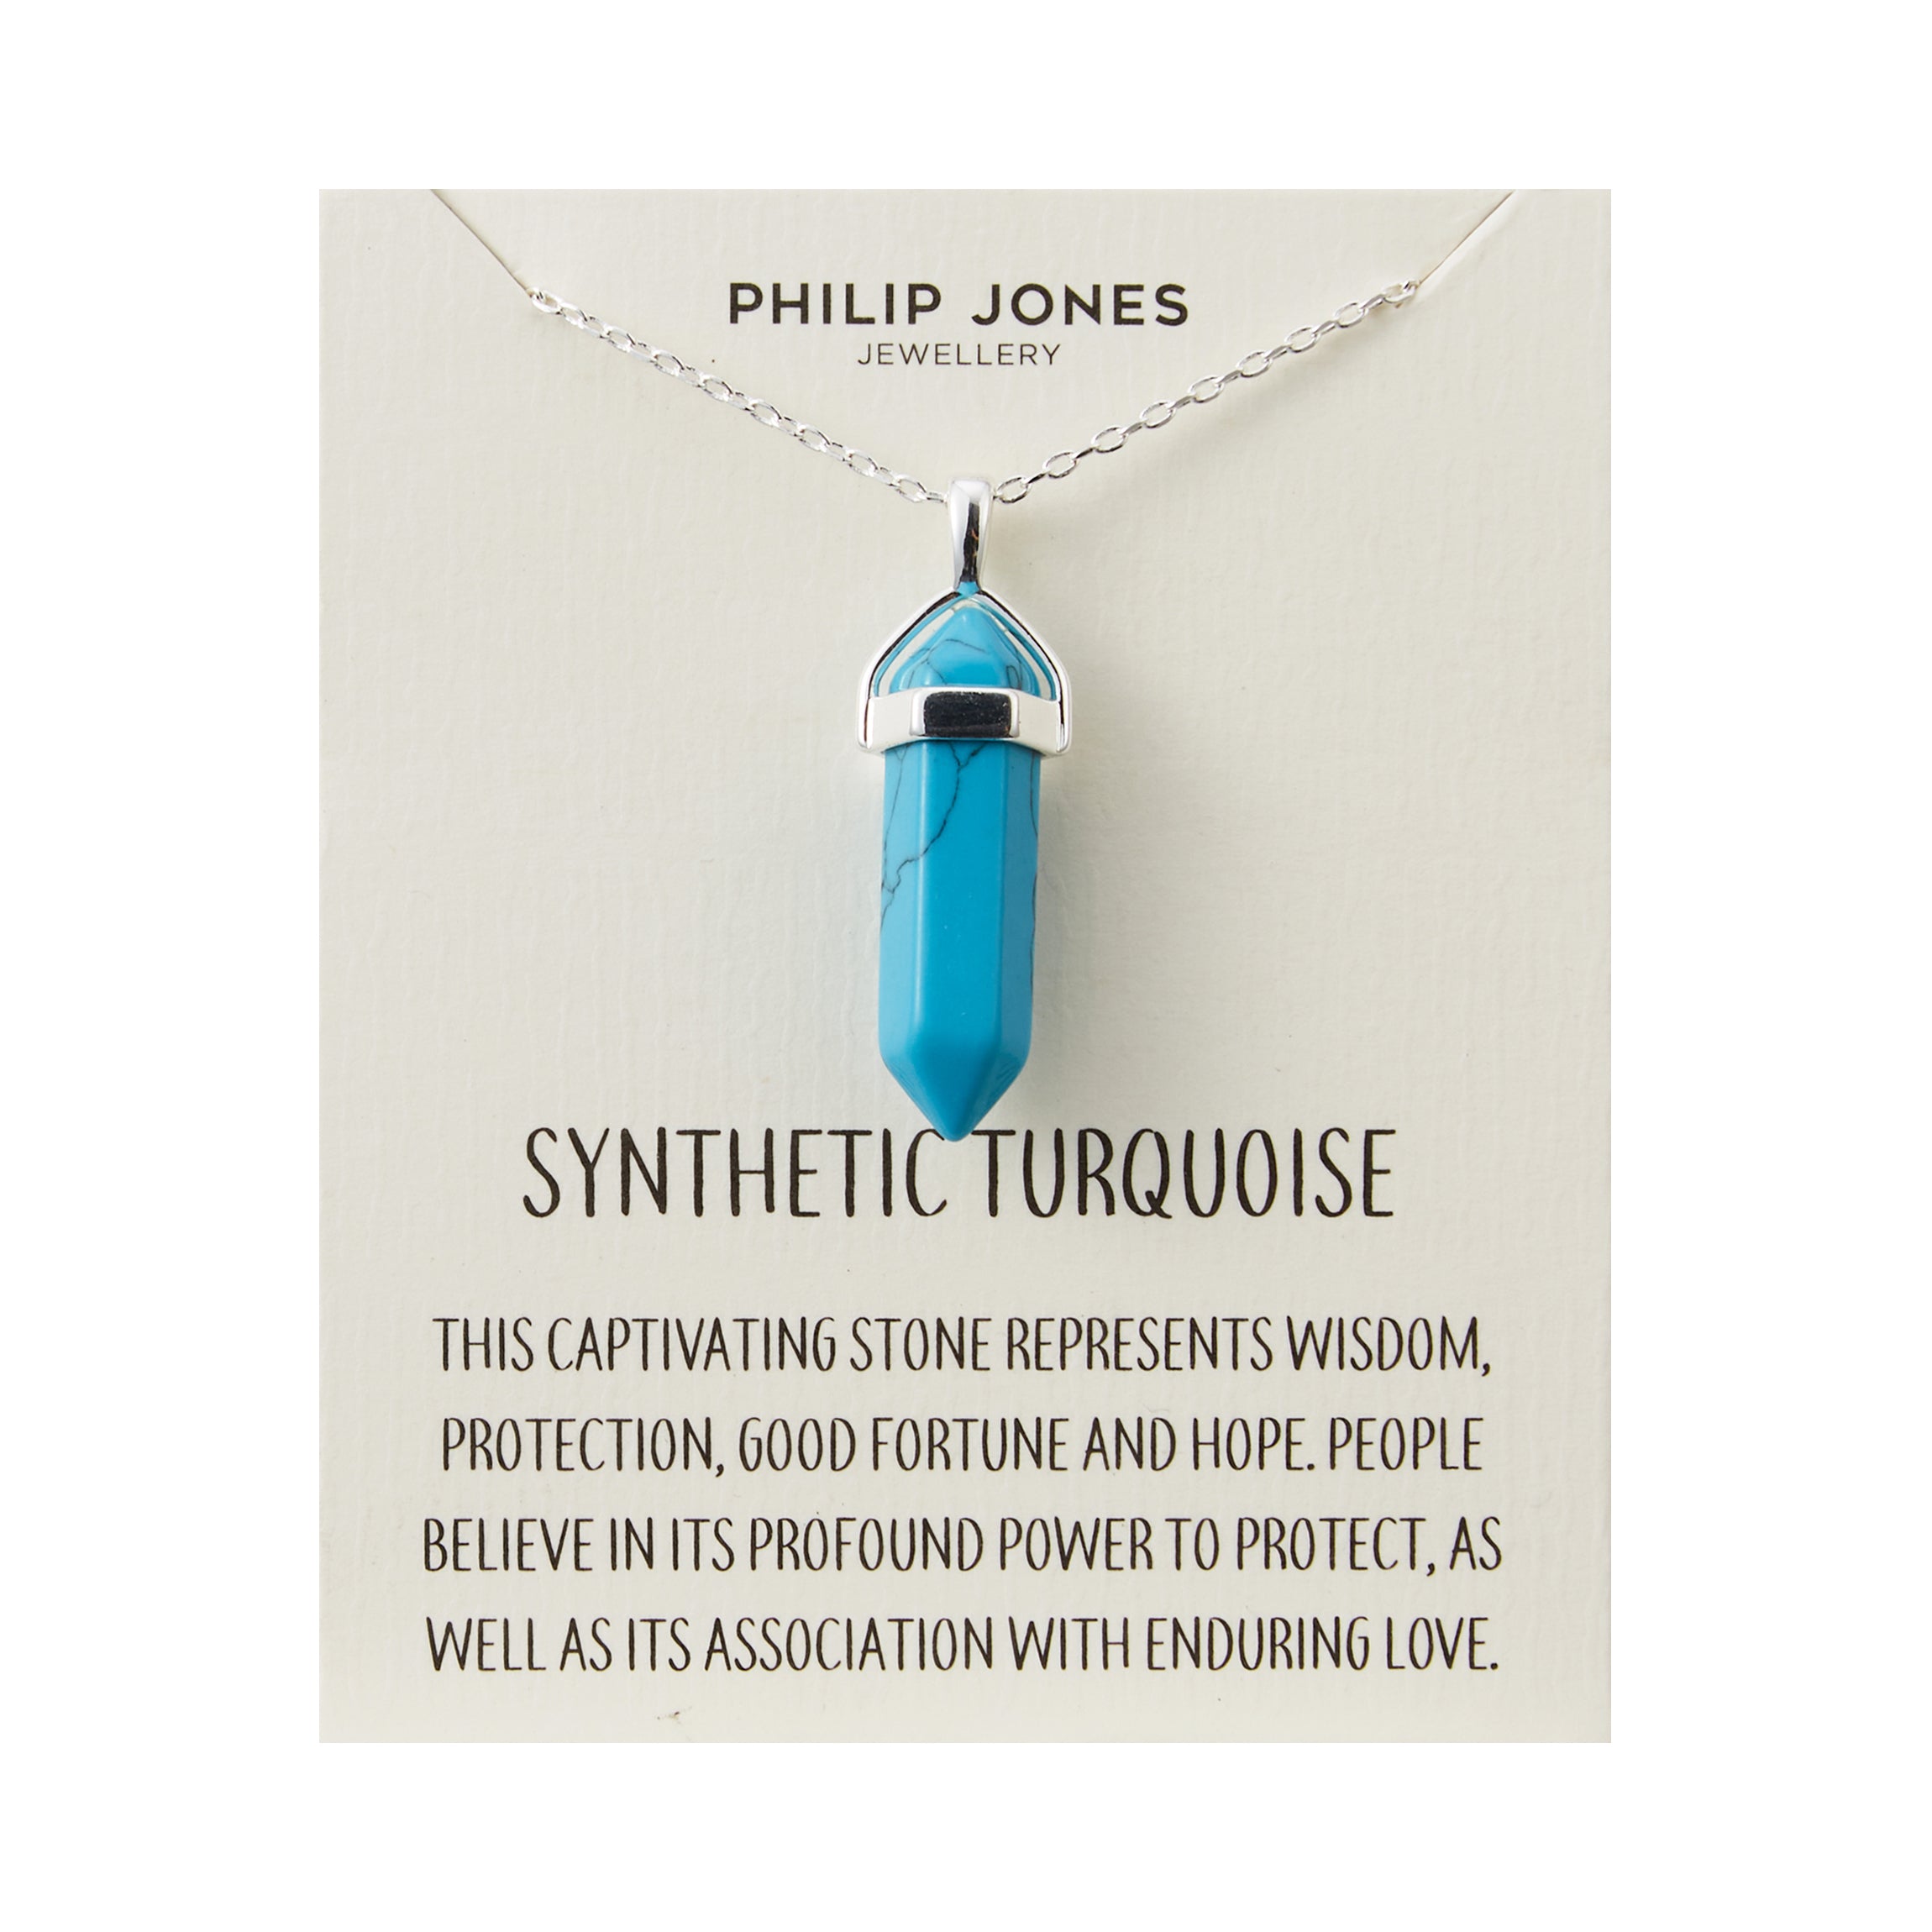 Synthetic Turquoise Gemstone Necklace with Quote Card